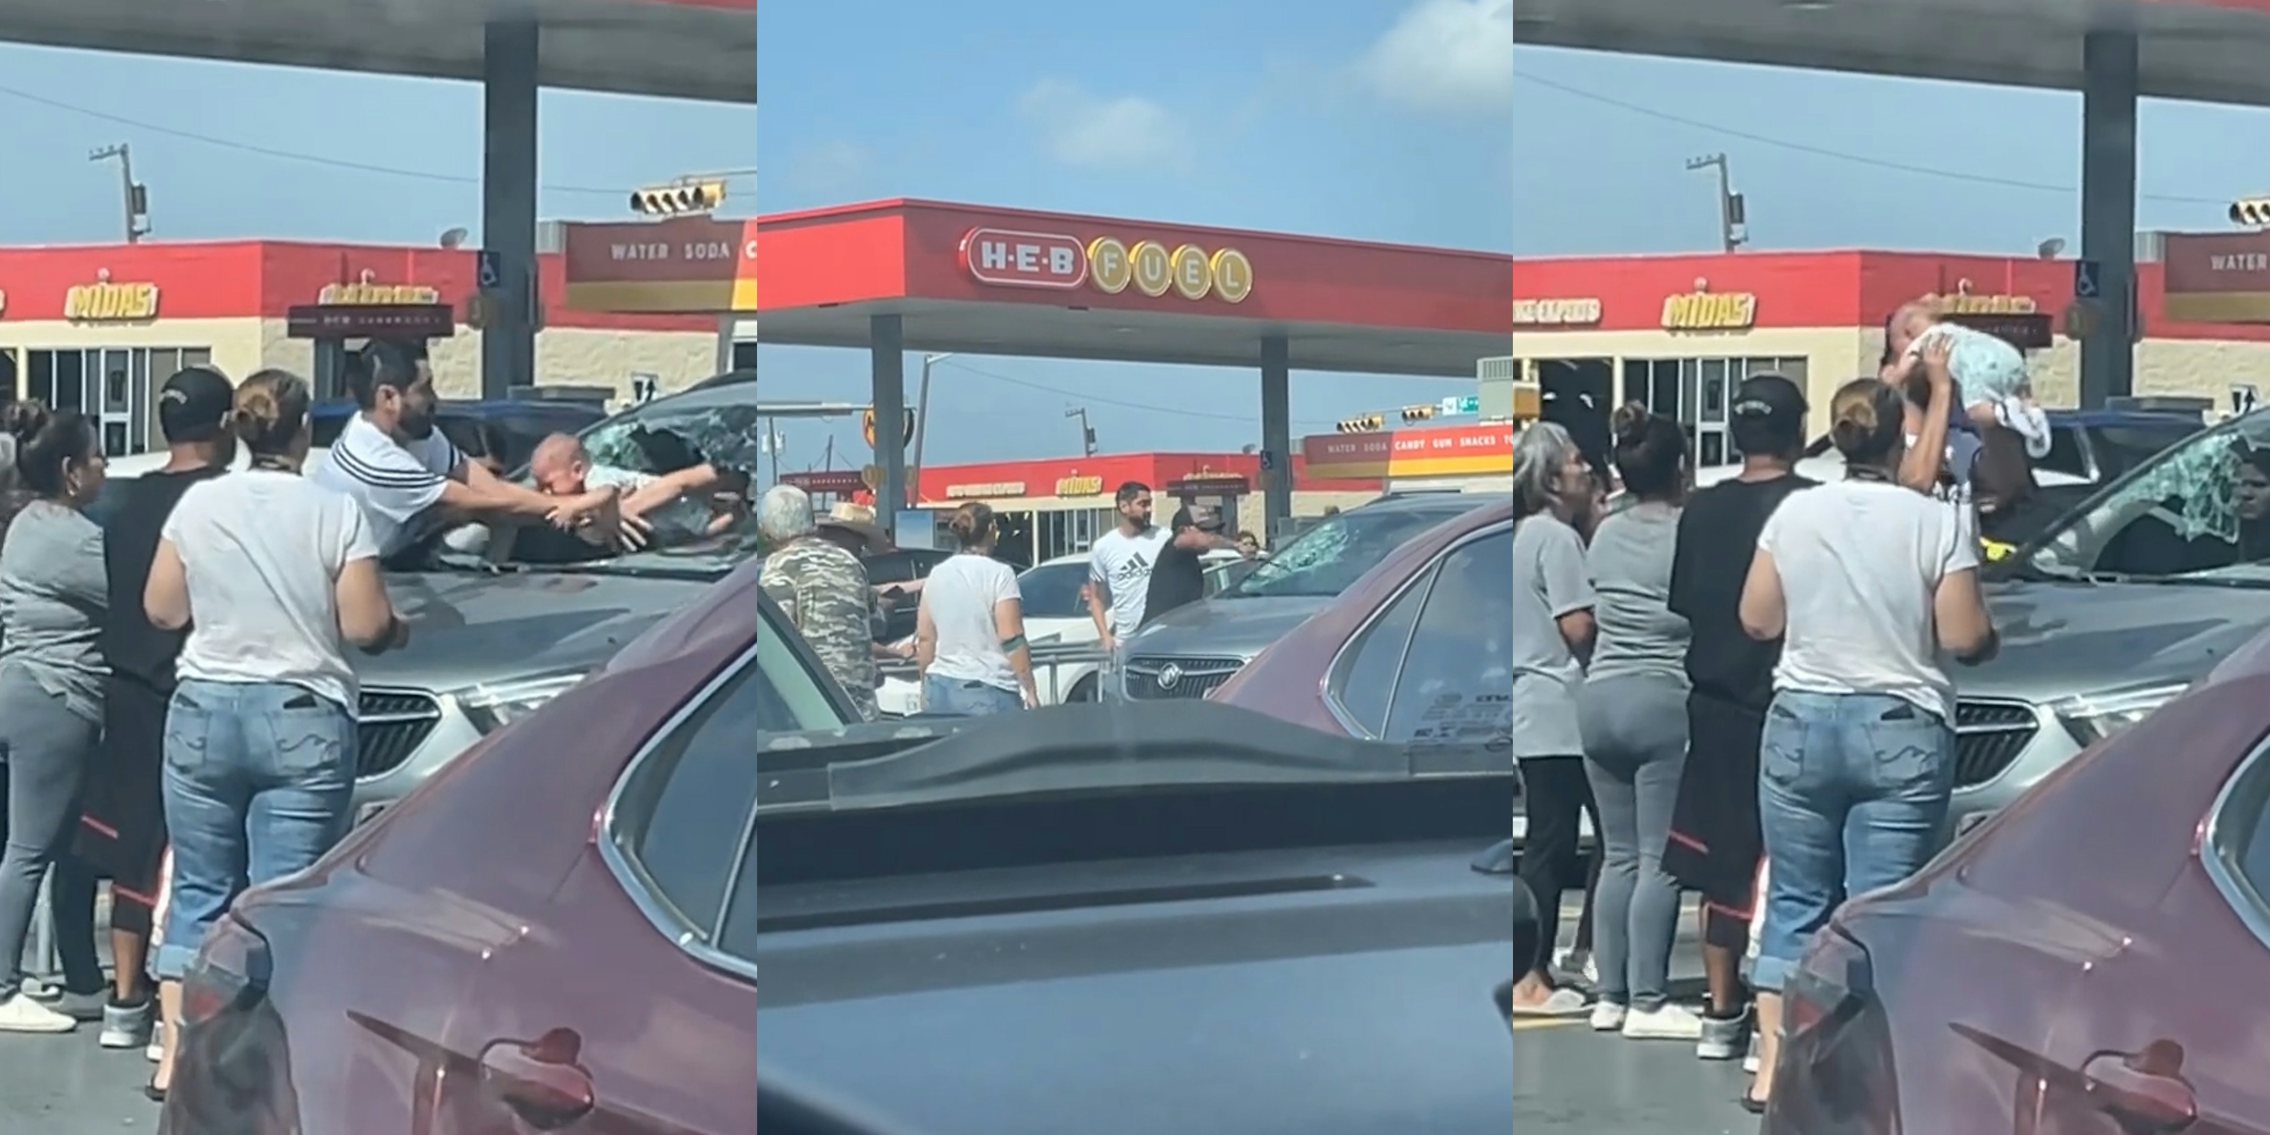 people taking baby out of car at HEB fuel station (l) people surrounding car with baby inside at HEB fuel station (c) people surrounding car holding baby at HEB fuel station (r)